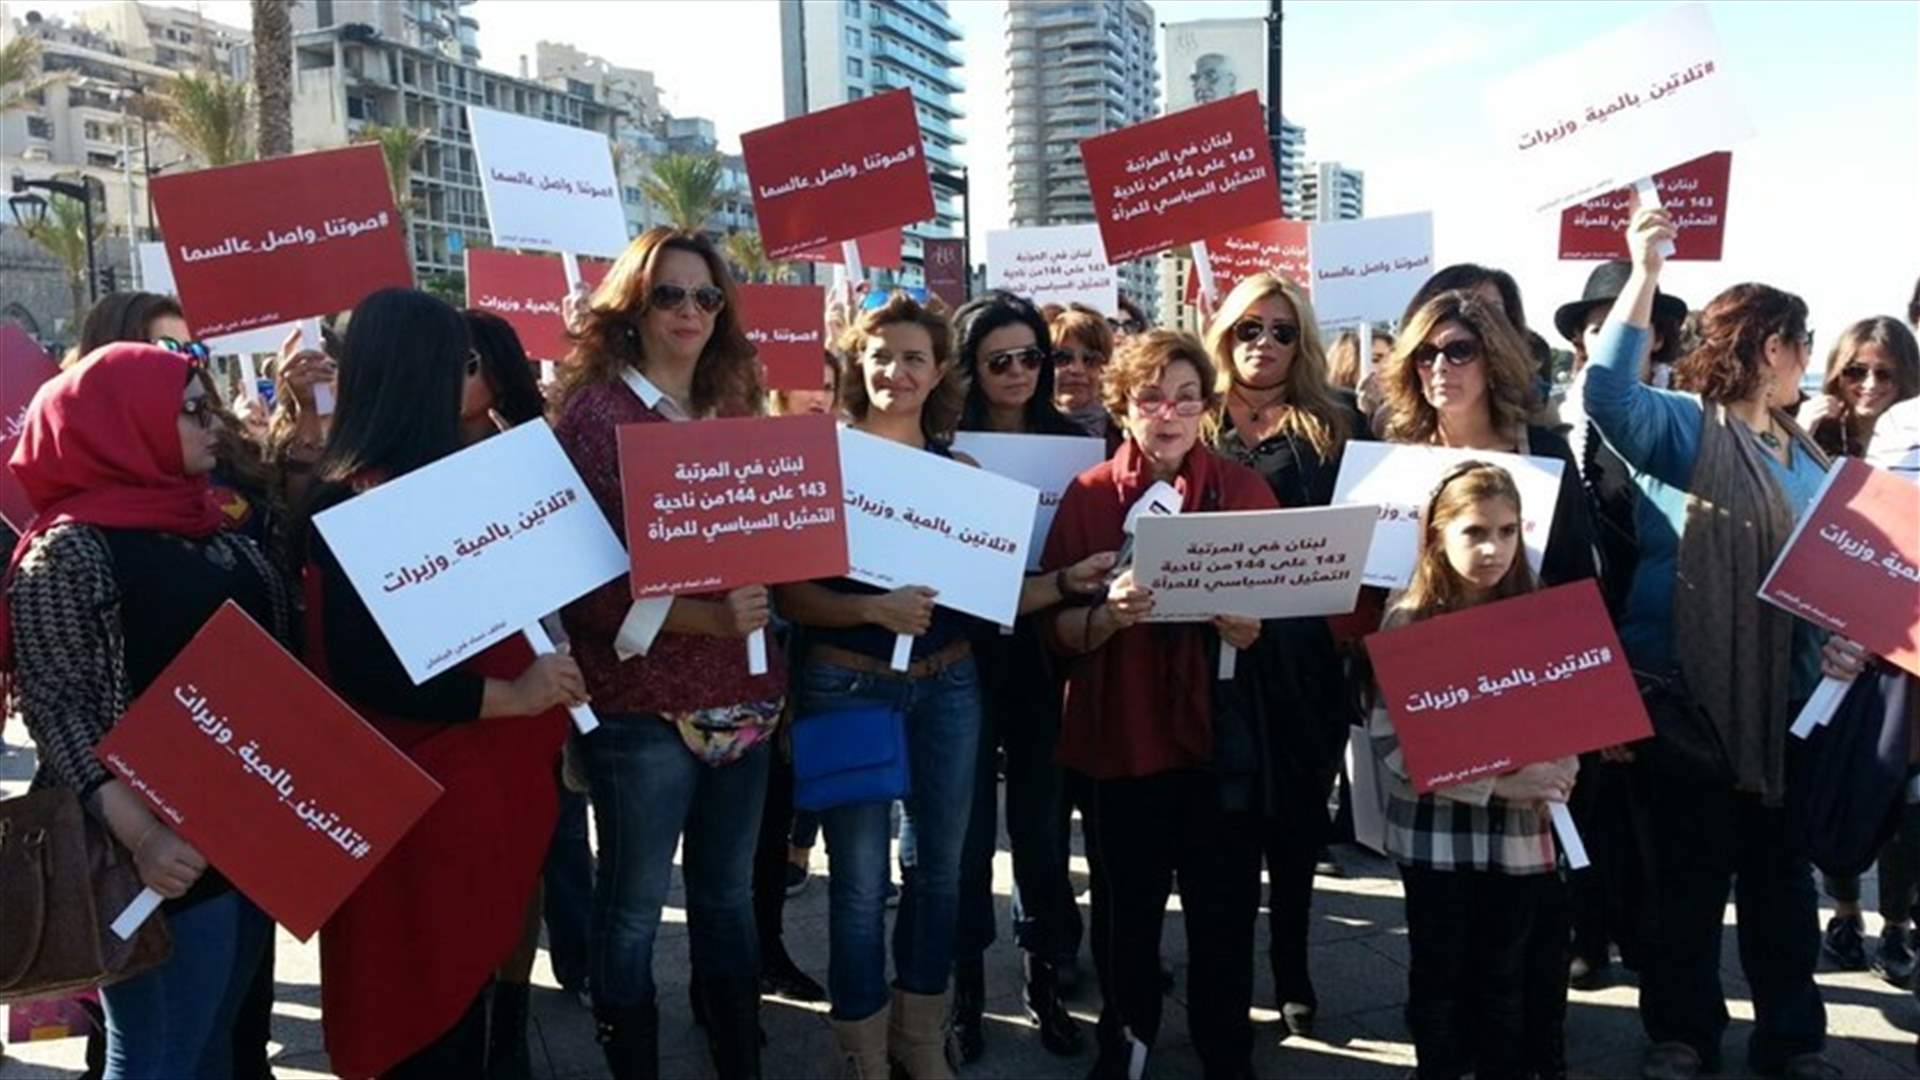 “Women in Parliament” coalition calls for 30% quota for women in new cabinet